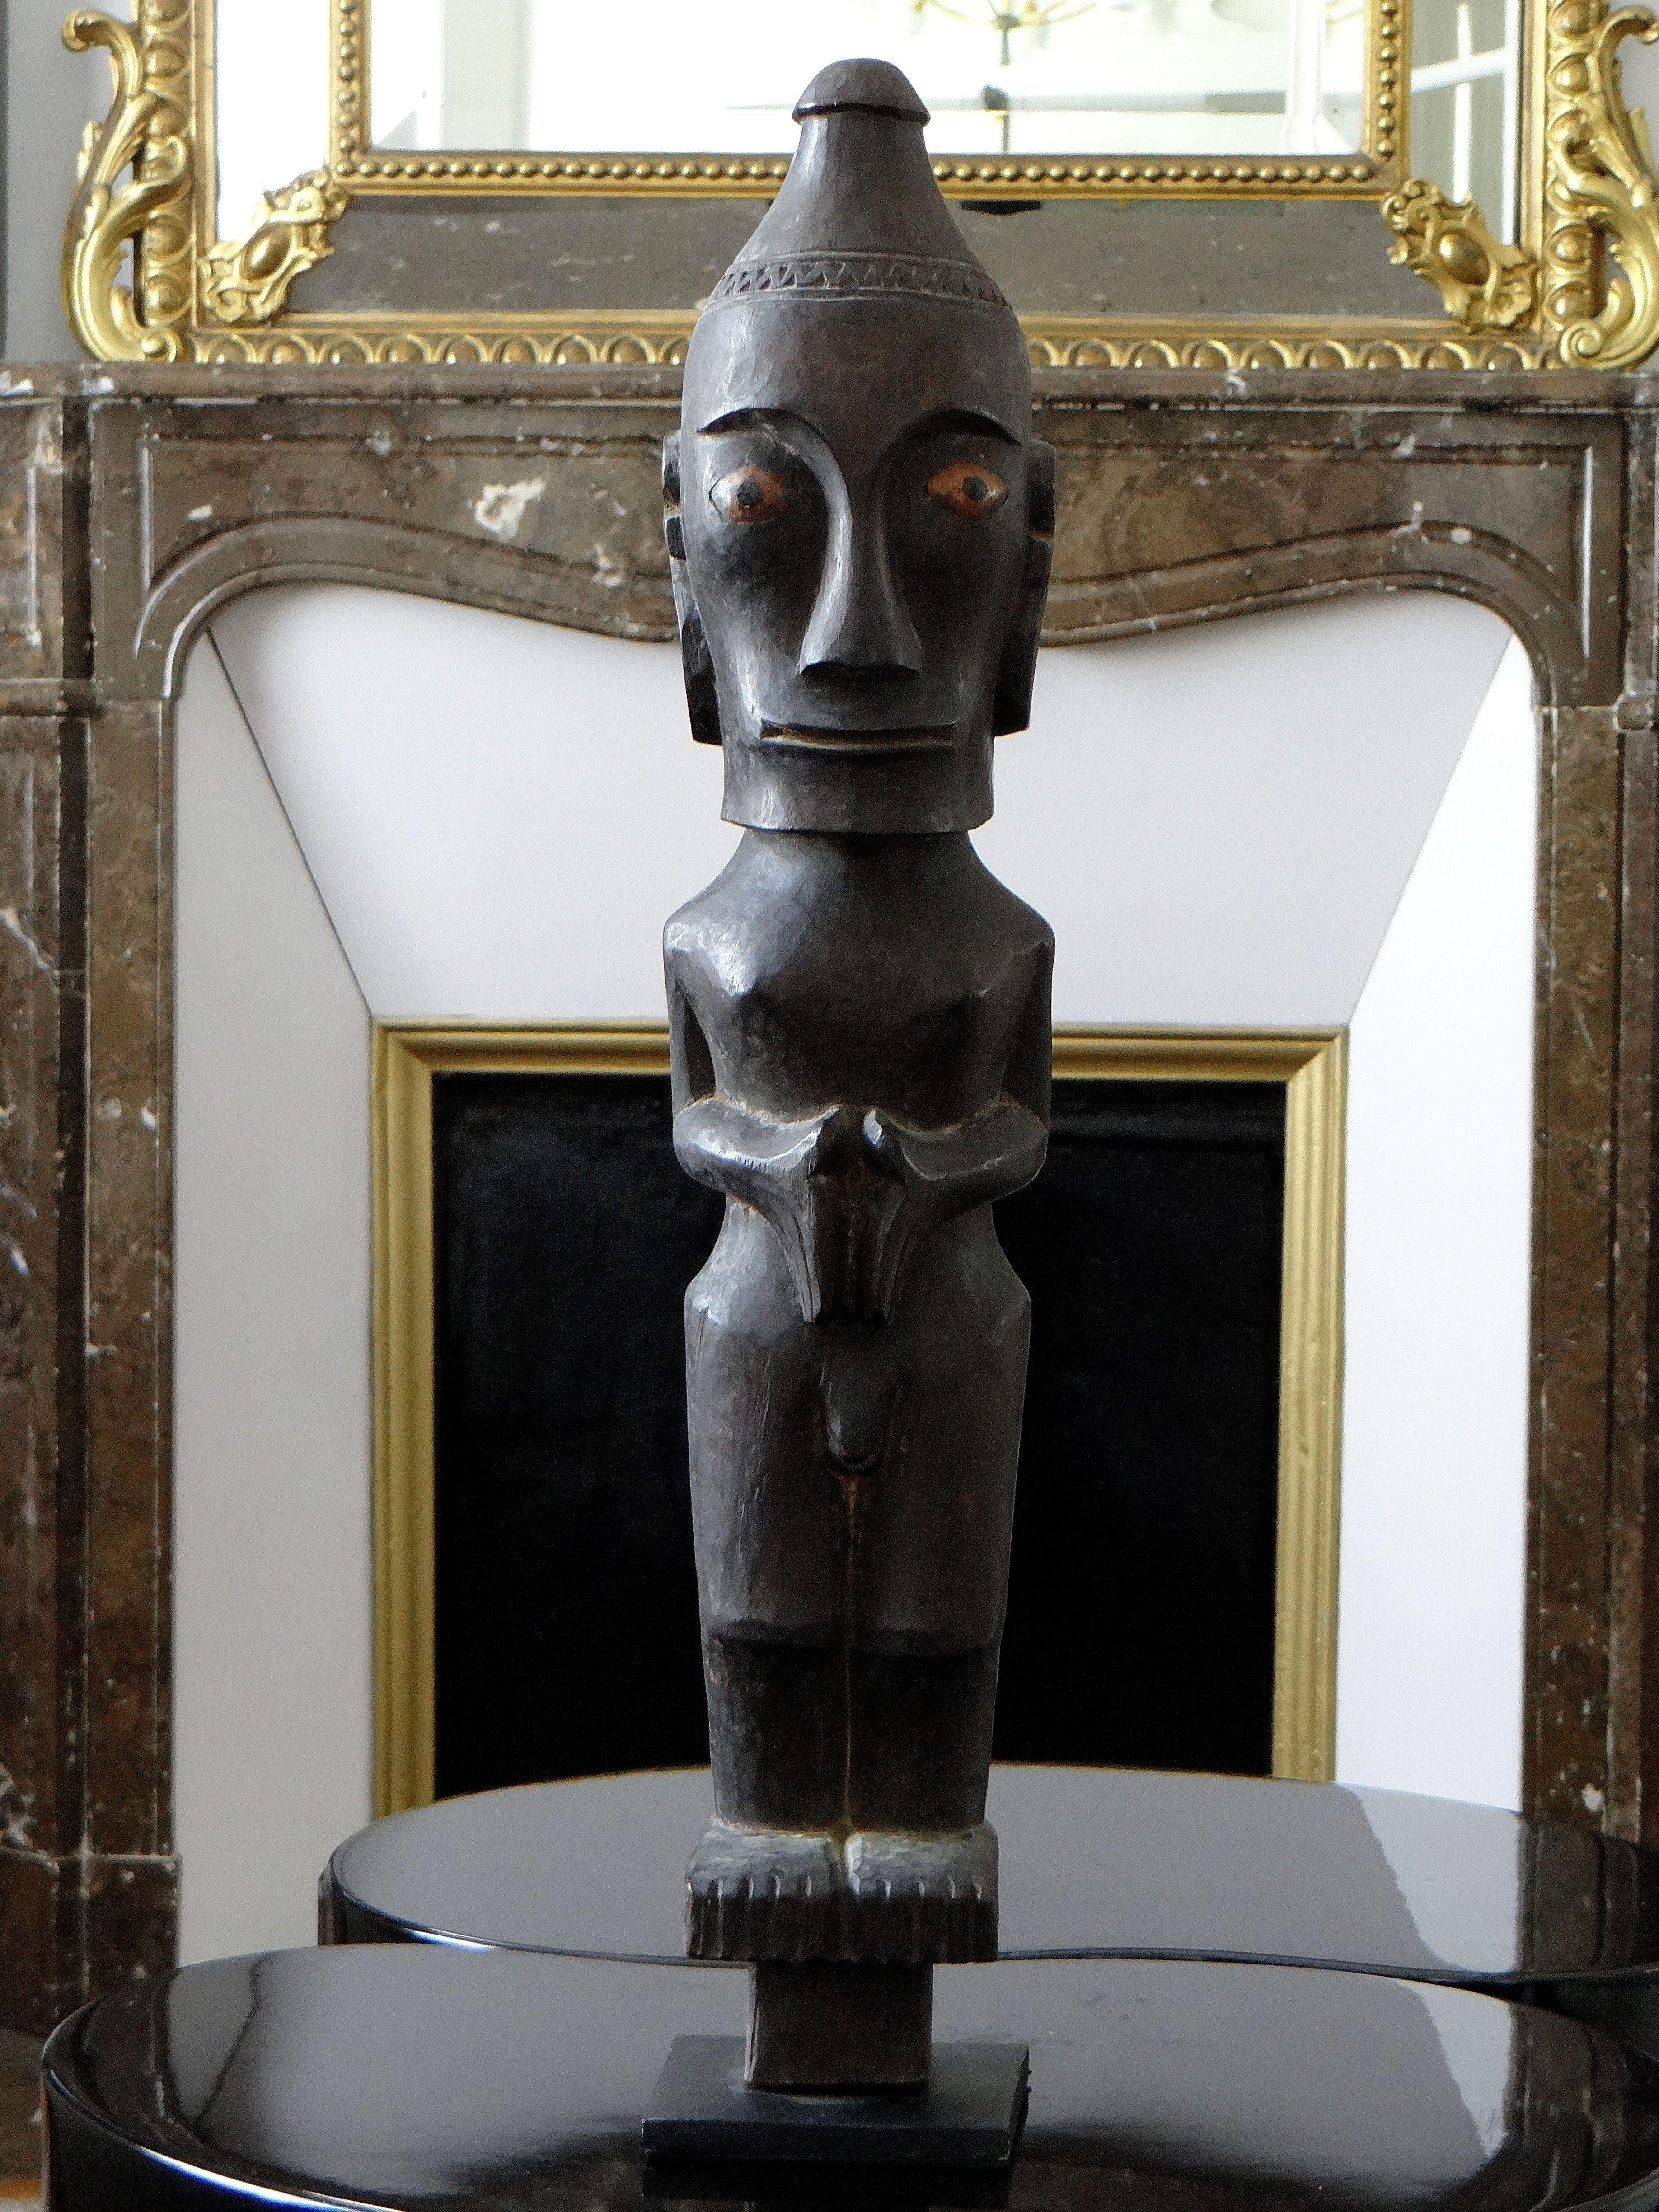 Beautiful Indonesian statue of the Batak Toba people, Sumatra island, carved patinated wood from the 1960s showing a character but joined and slightly bent legs whose gaze fixed a distant point. Very good quality of the sculpture and beautiful